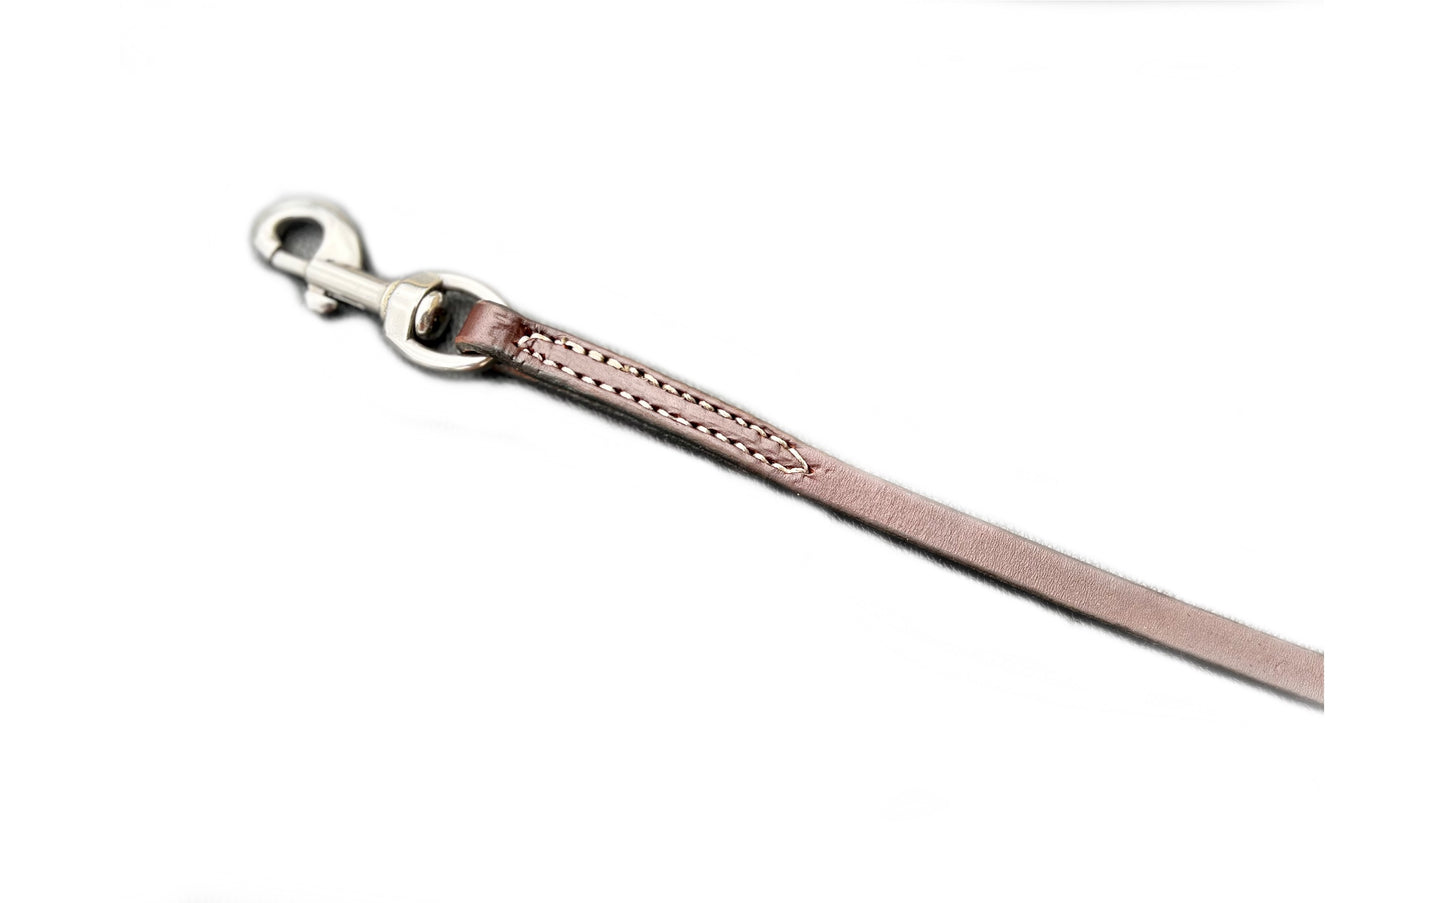 3/8" Top Grain Stitched Leather Leash